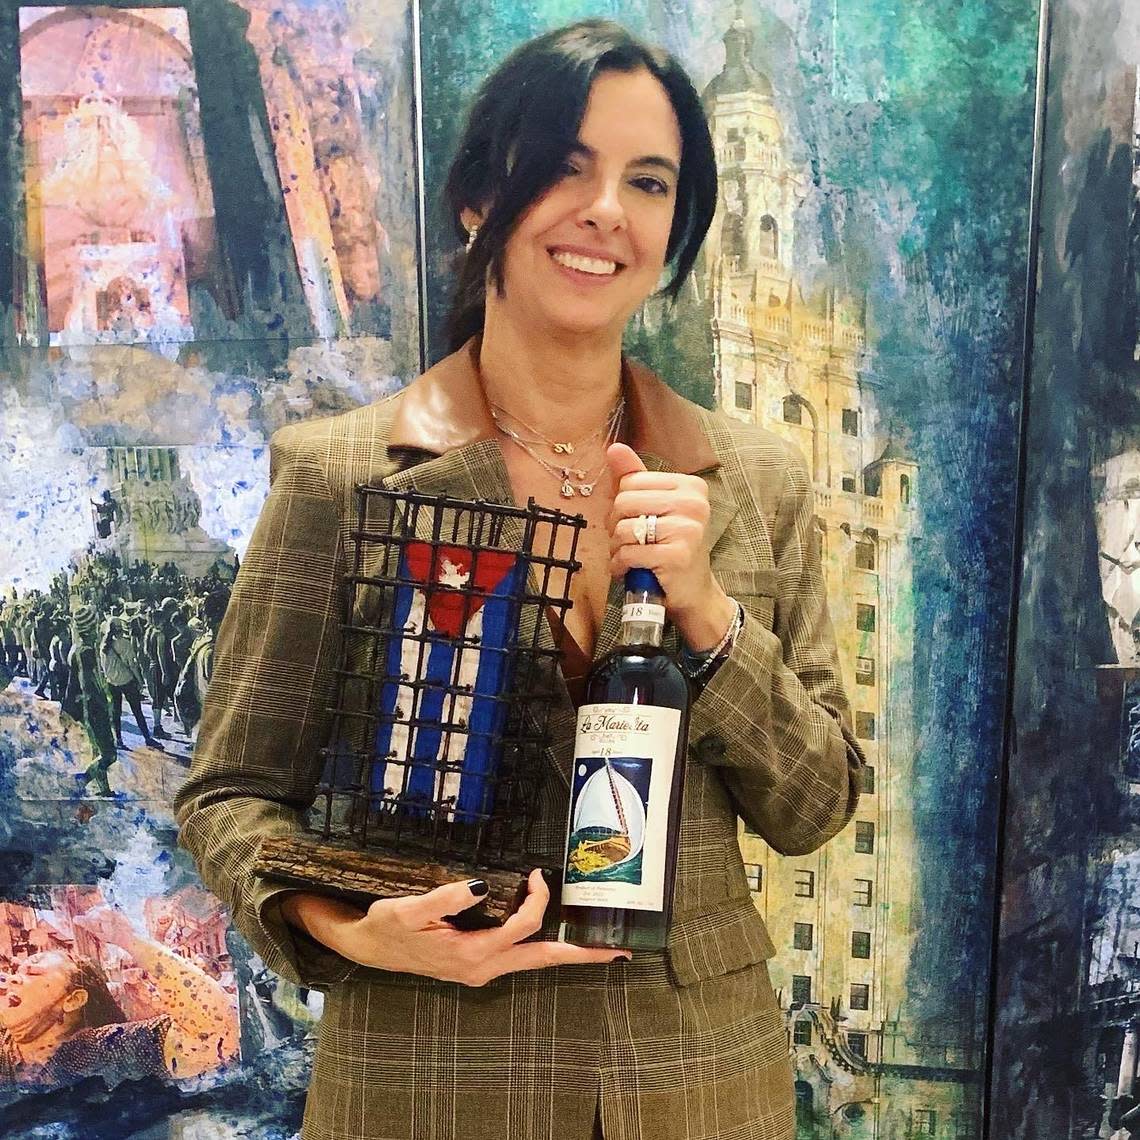 Janet Díaz Bonilla at the presentation of her rum La Marielita, inspired by her trip to the United States through the Mariel-Key West sea bridge, at the Freedom Tower in downtown Miami.